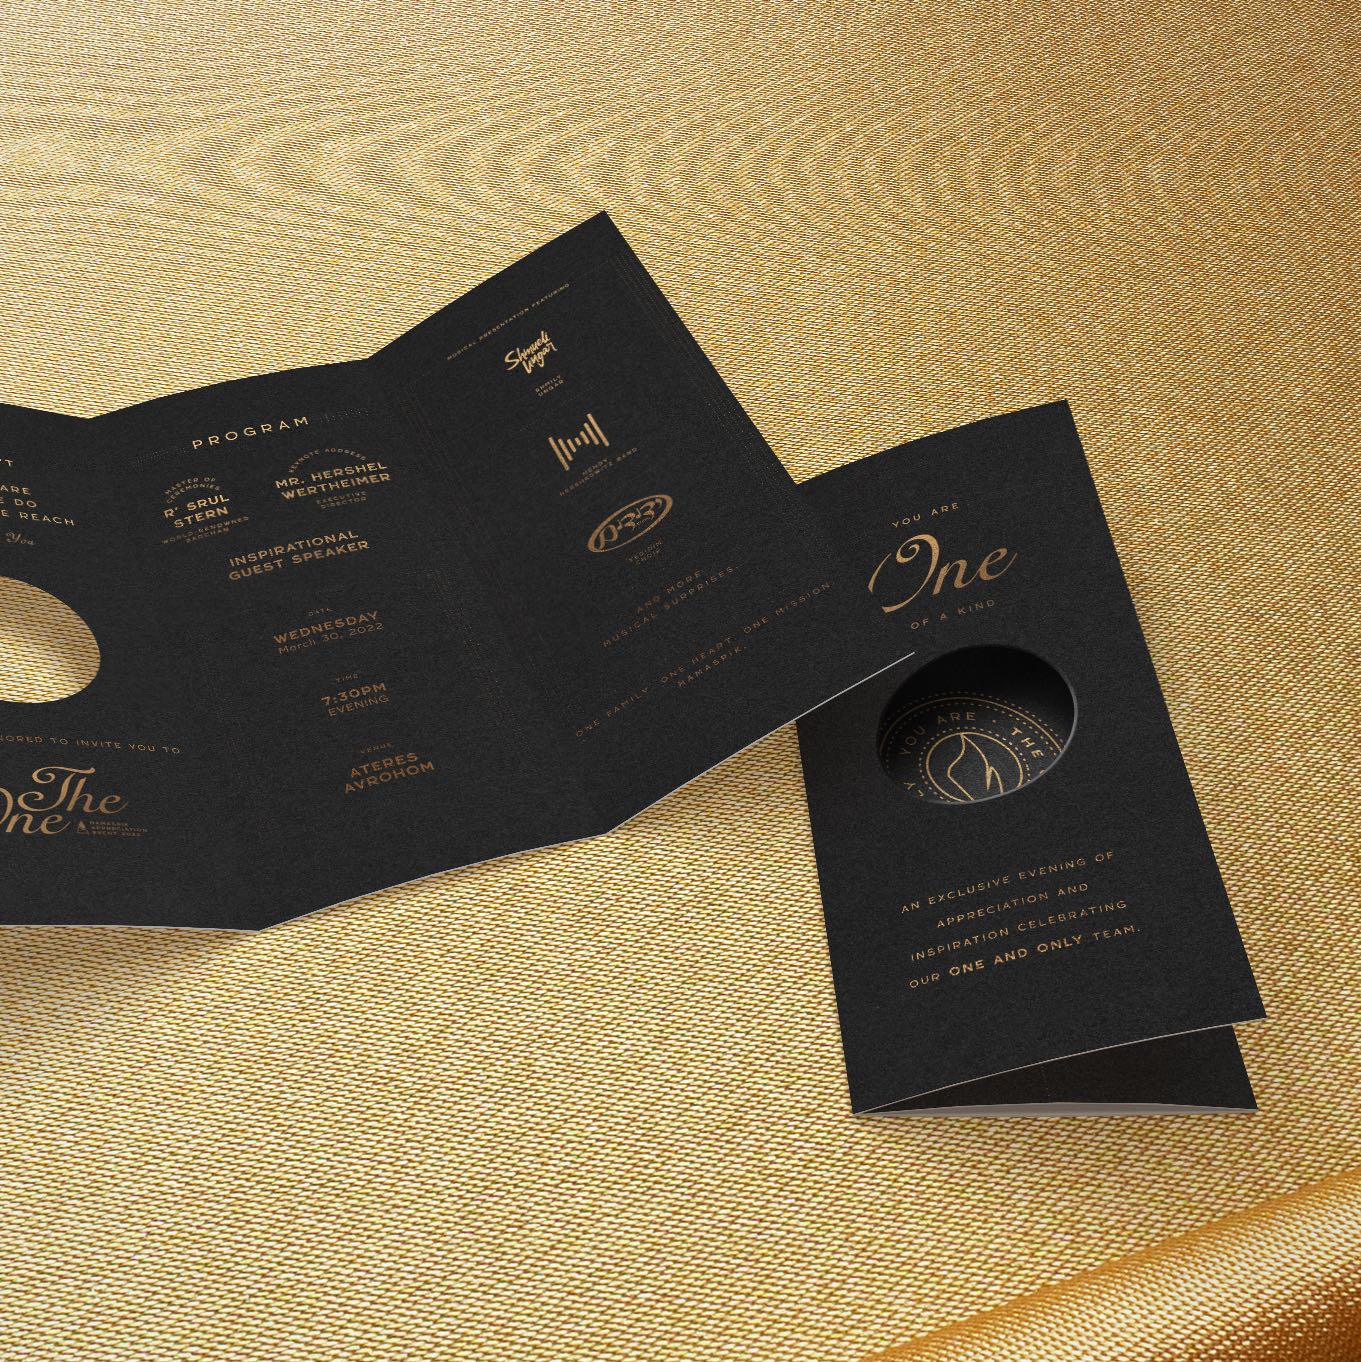 Invitation for The One Event by Hamaspik